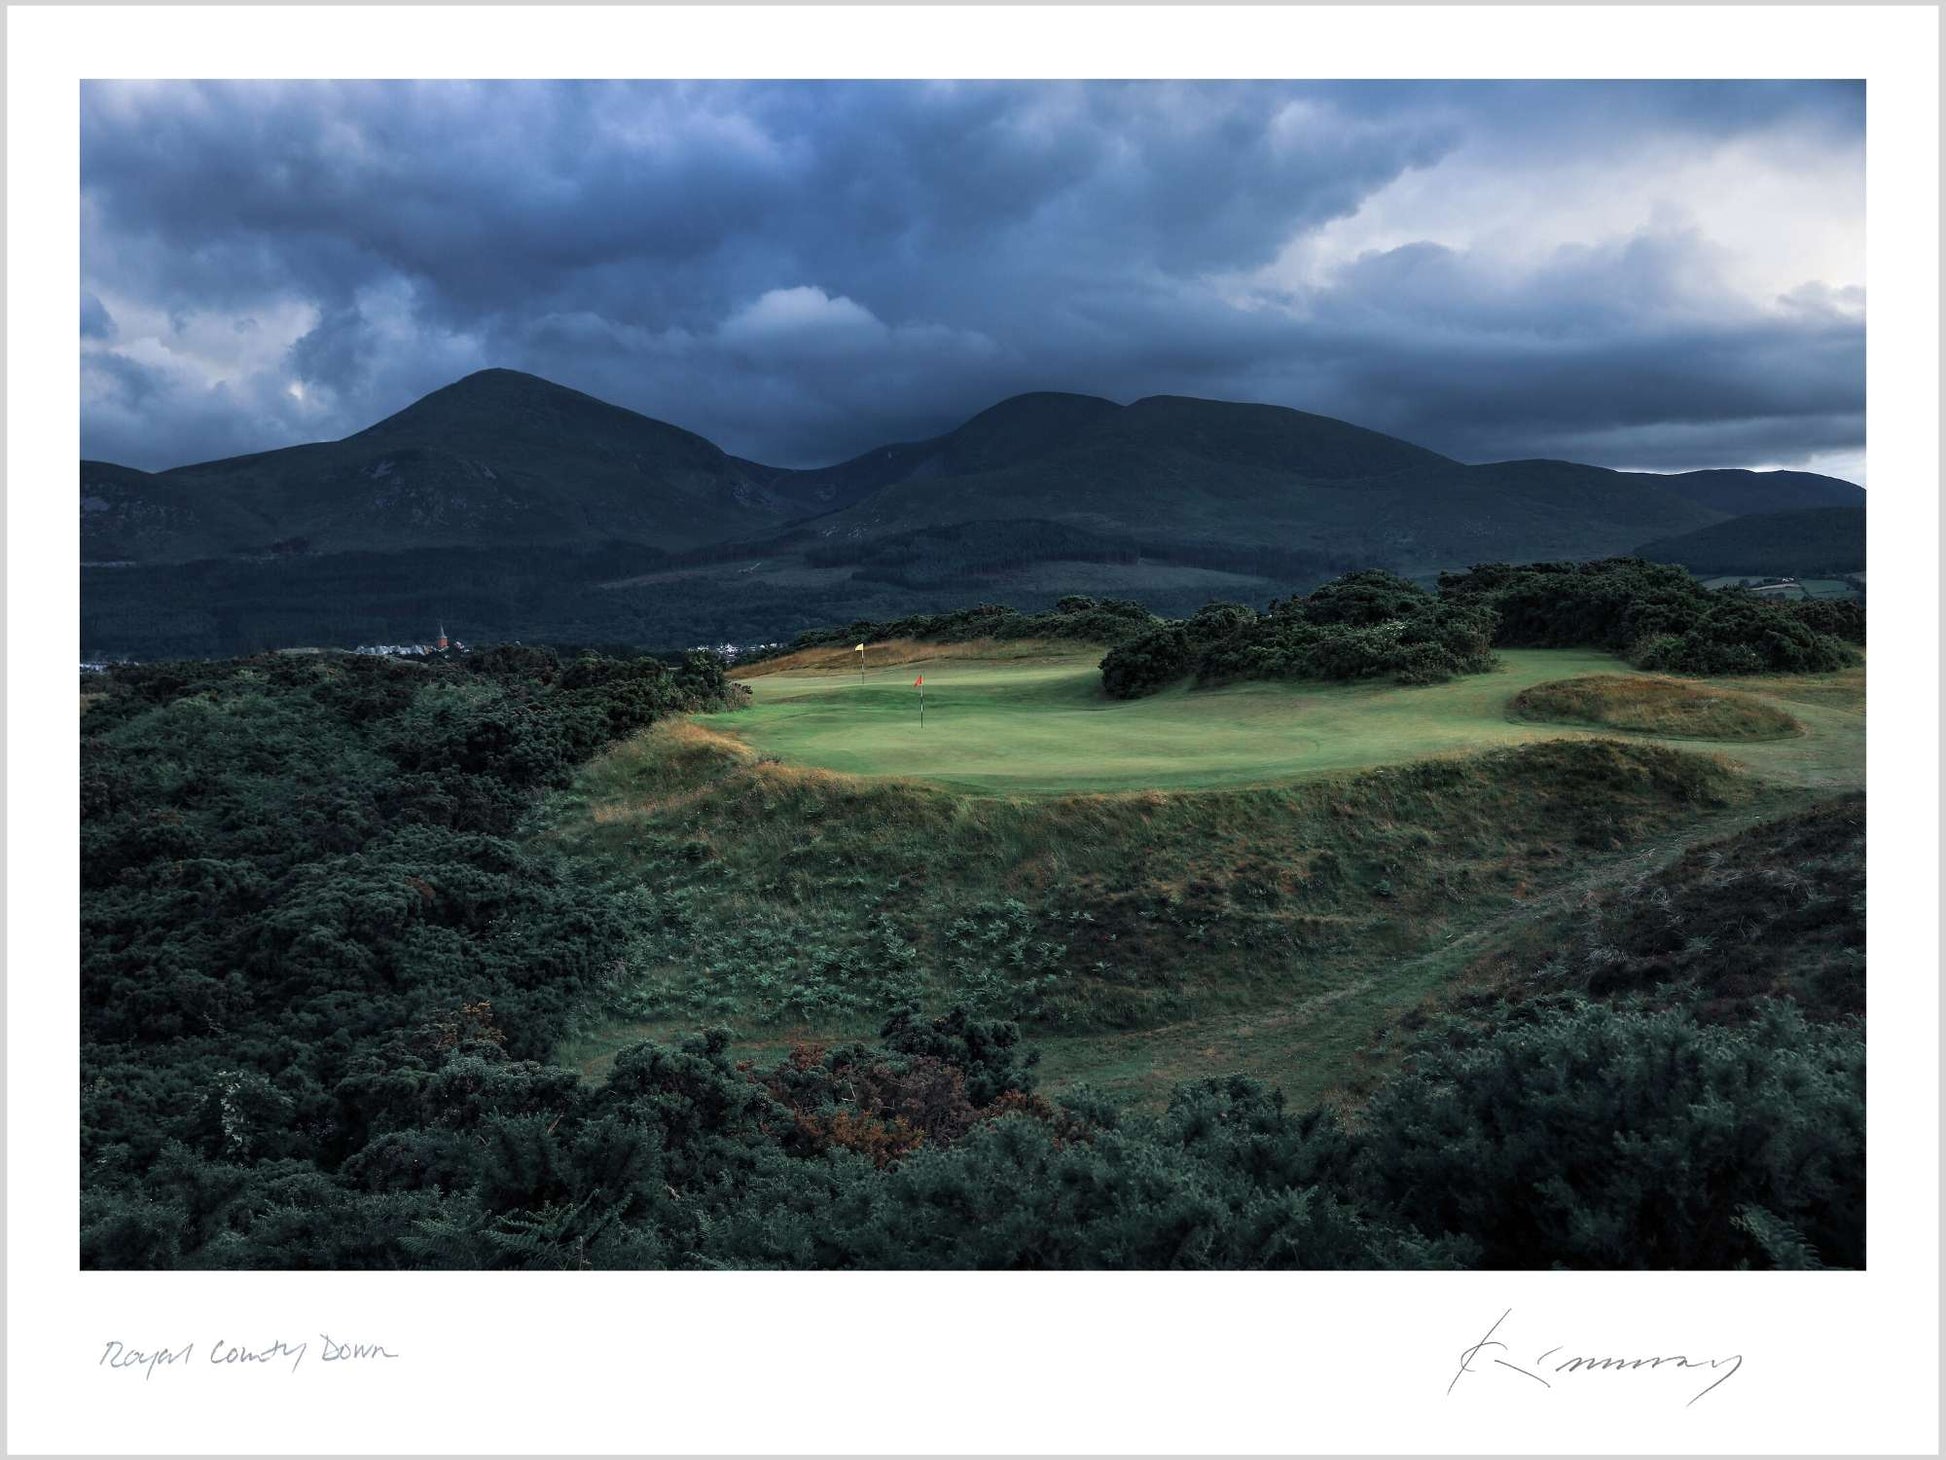 A photo of Royal County Down taken by Kevin Murray.